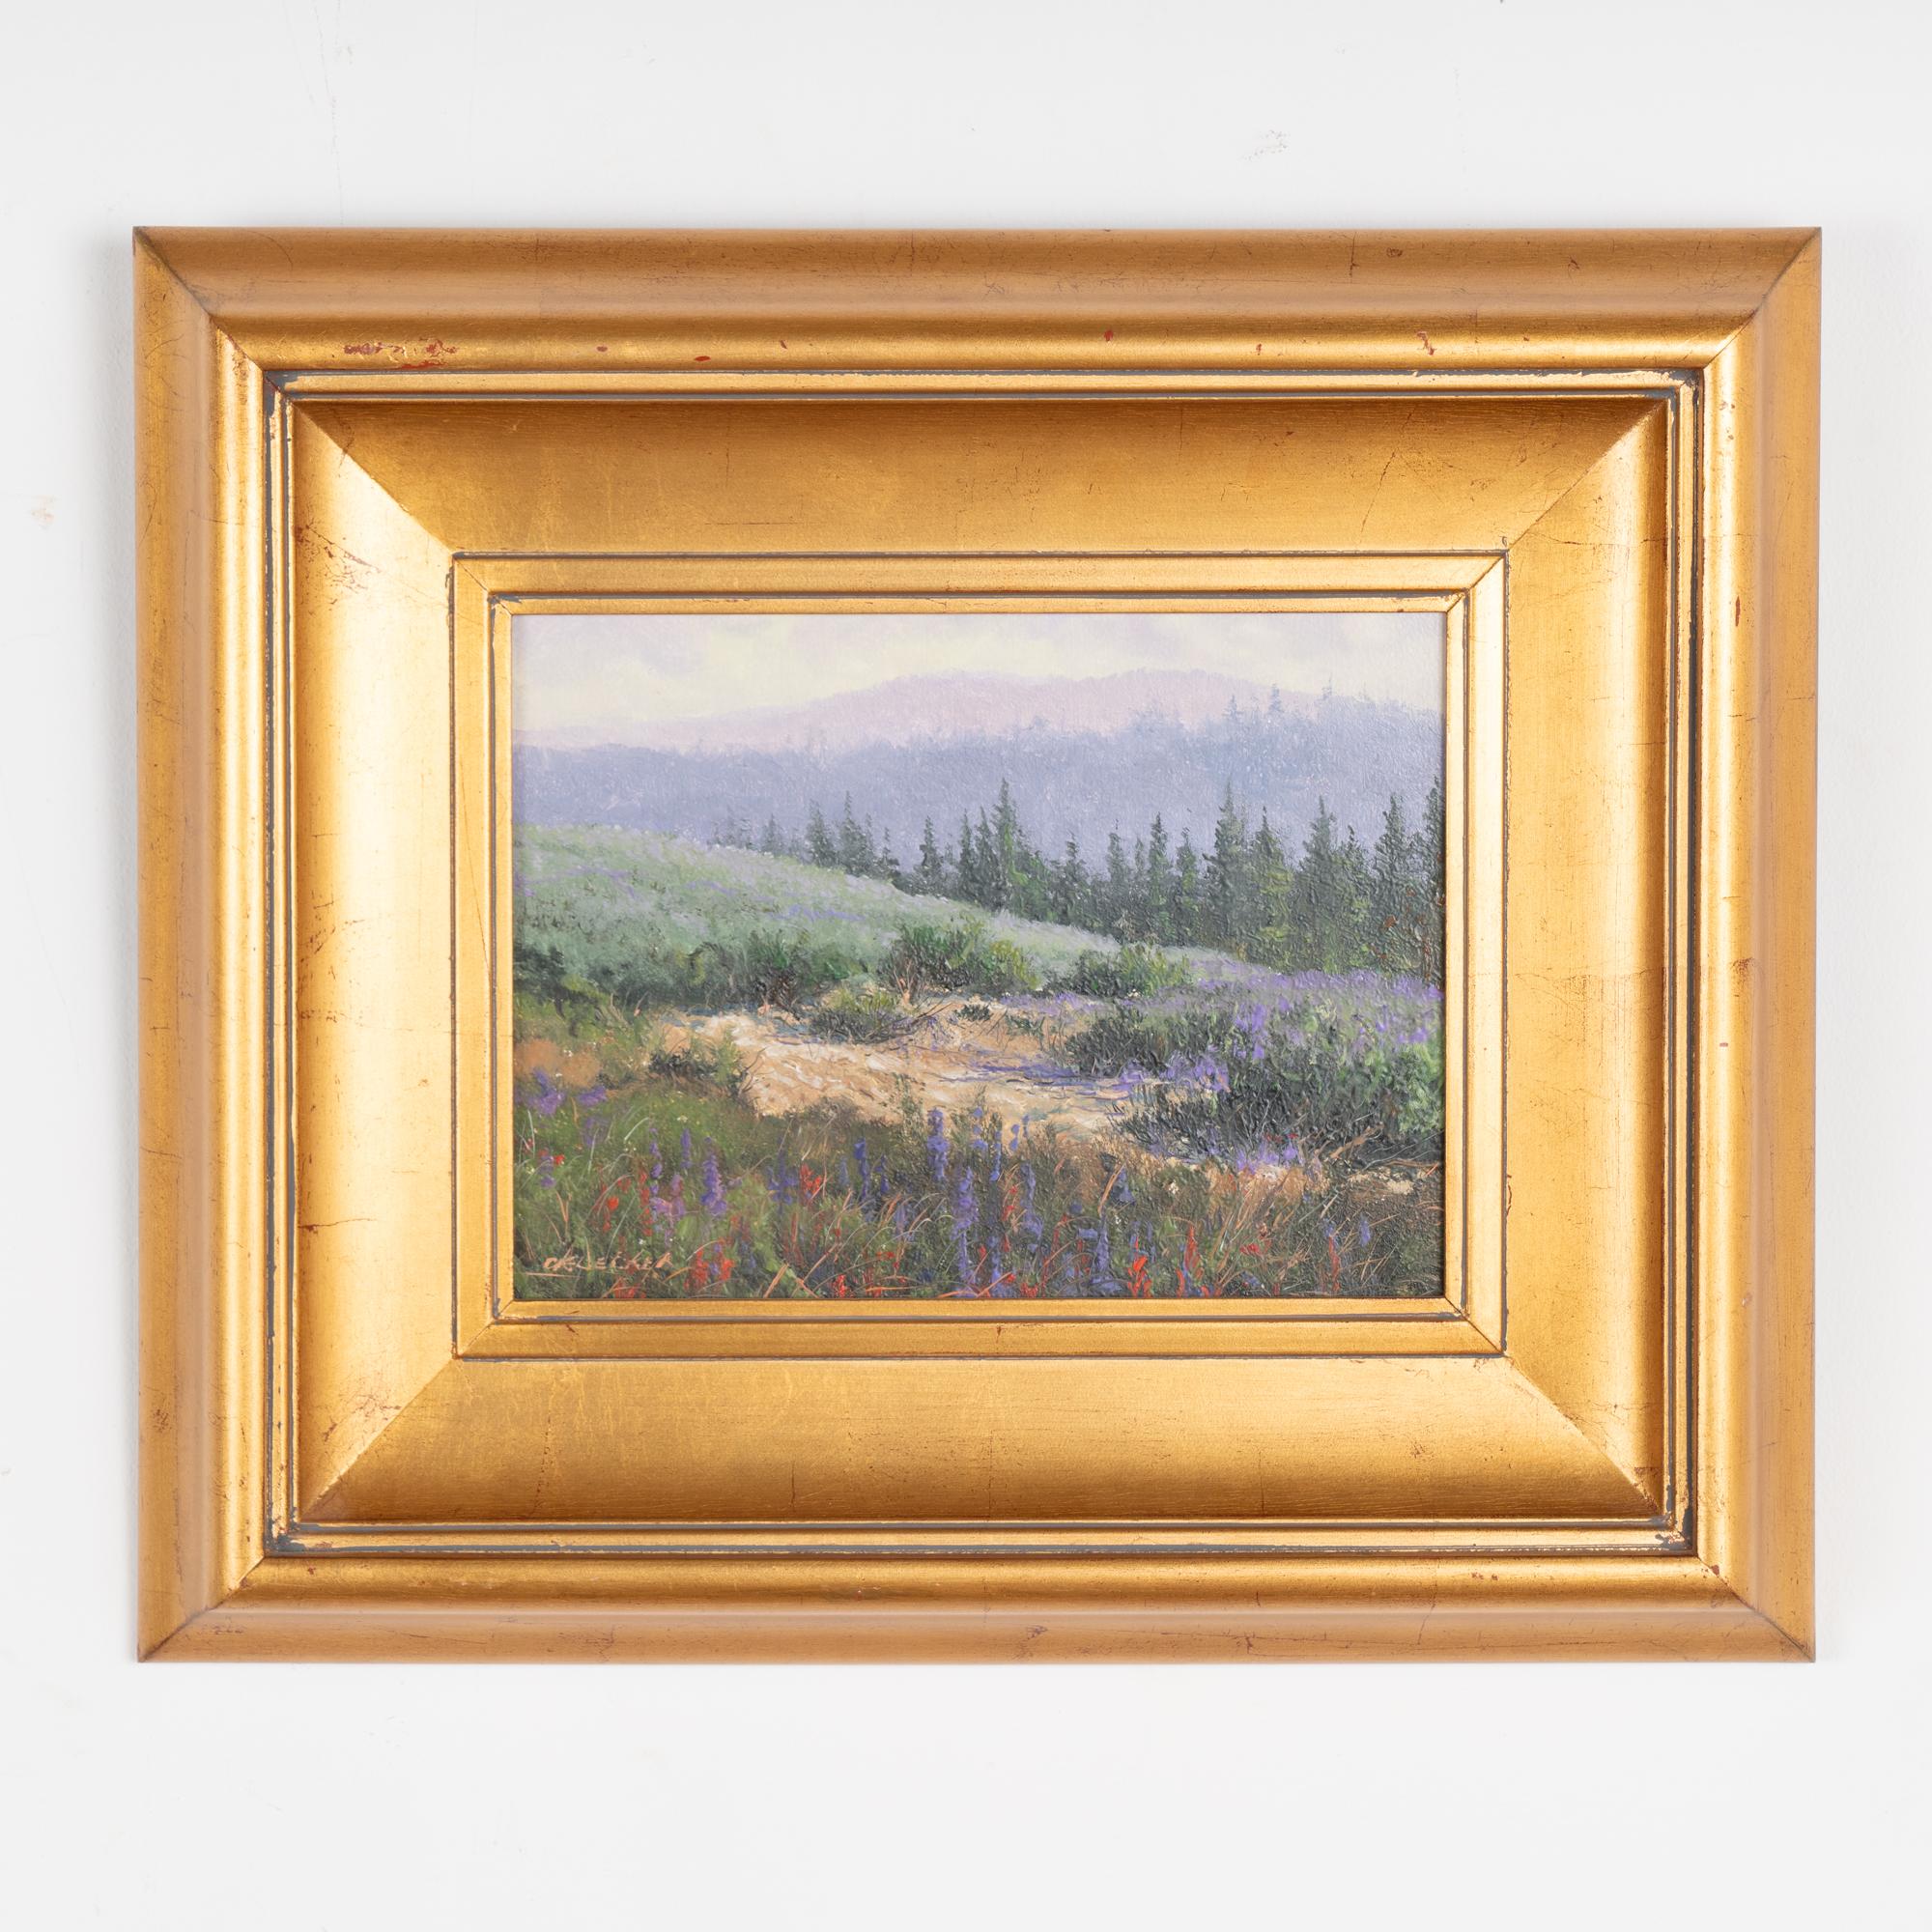 Delightful small landscape oil on canvas painting with flowers in foreground, dried river bed, pine trees and mountain in background.
